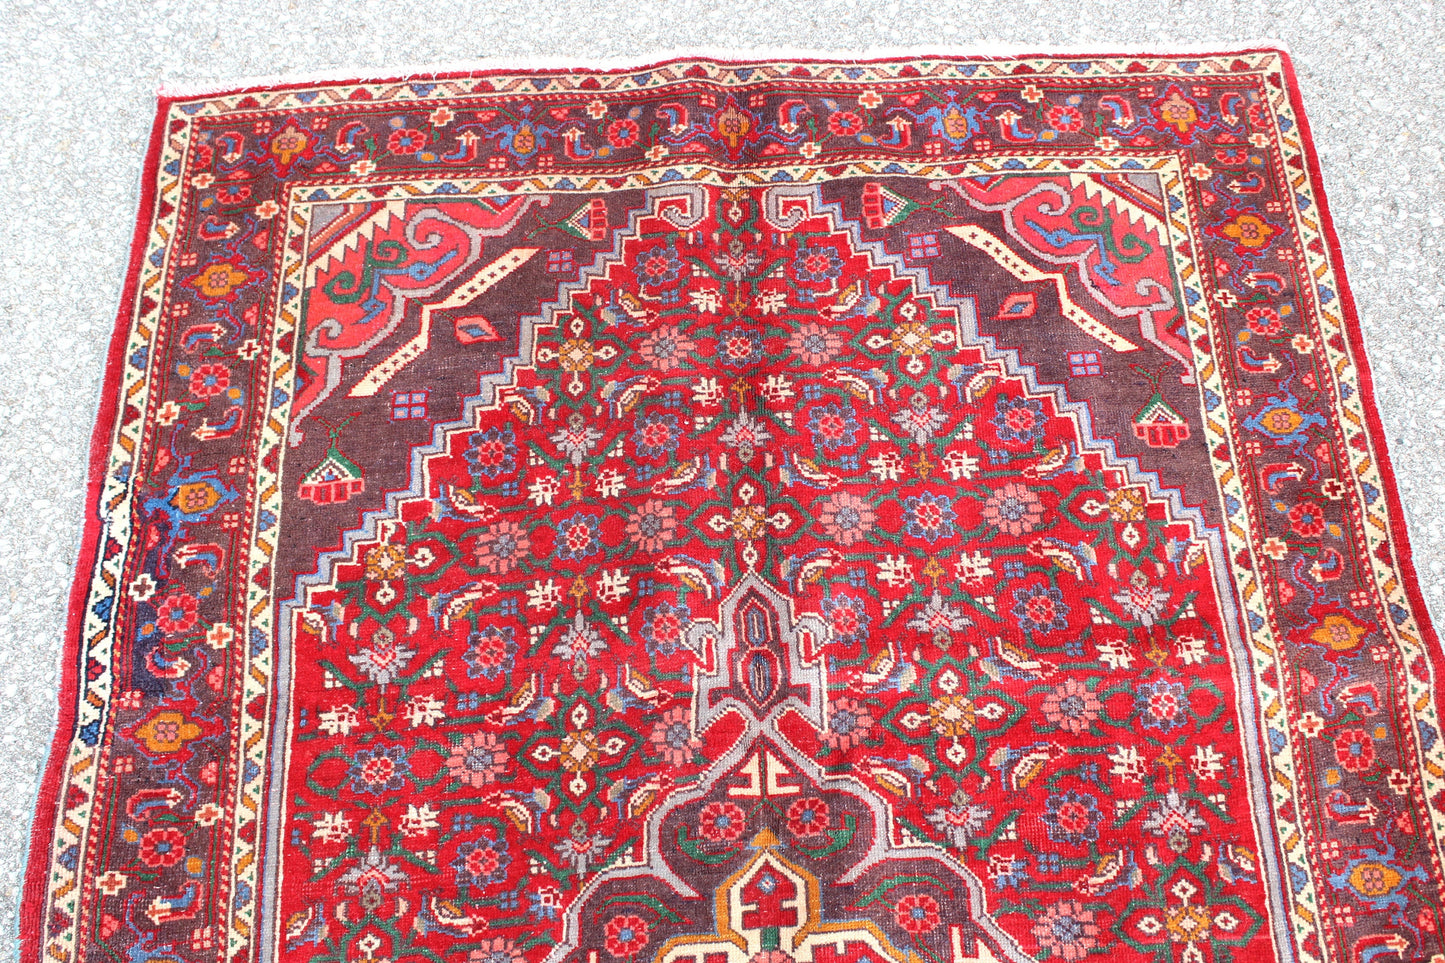 Rug 3'5" x 5'5" Red with Blue Vintage Accents Handmade Rug